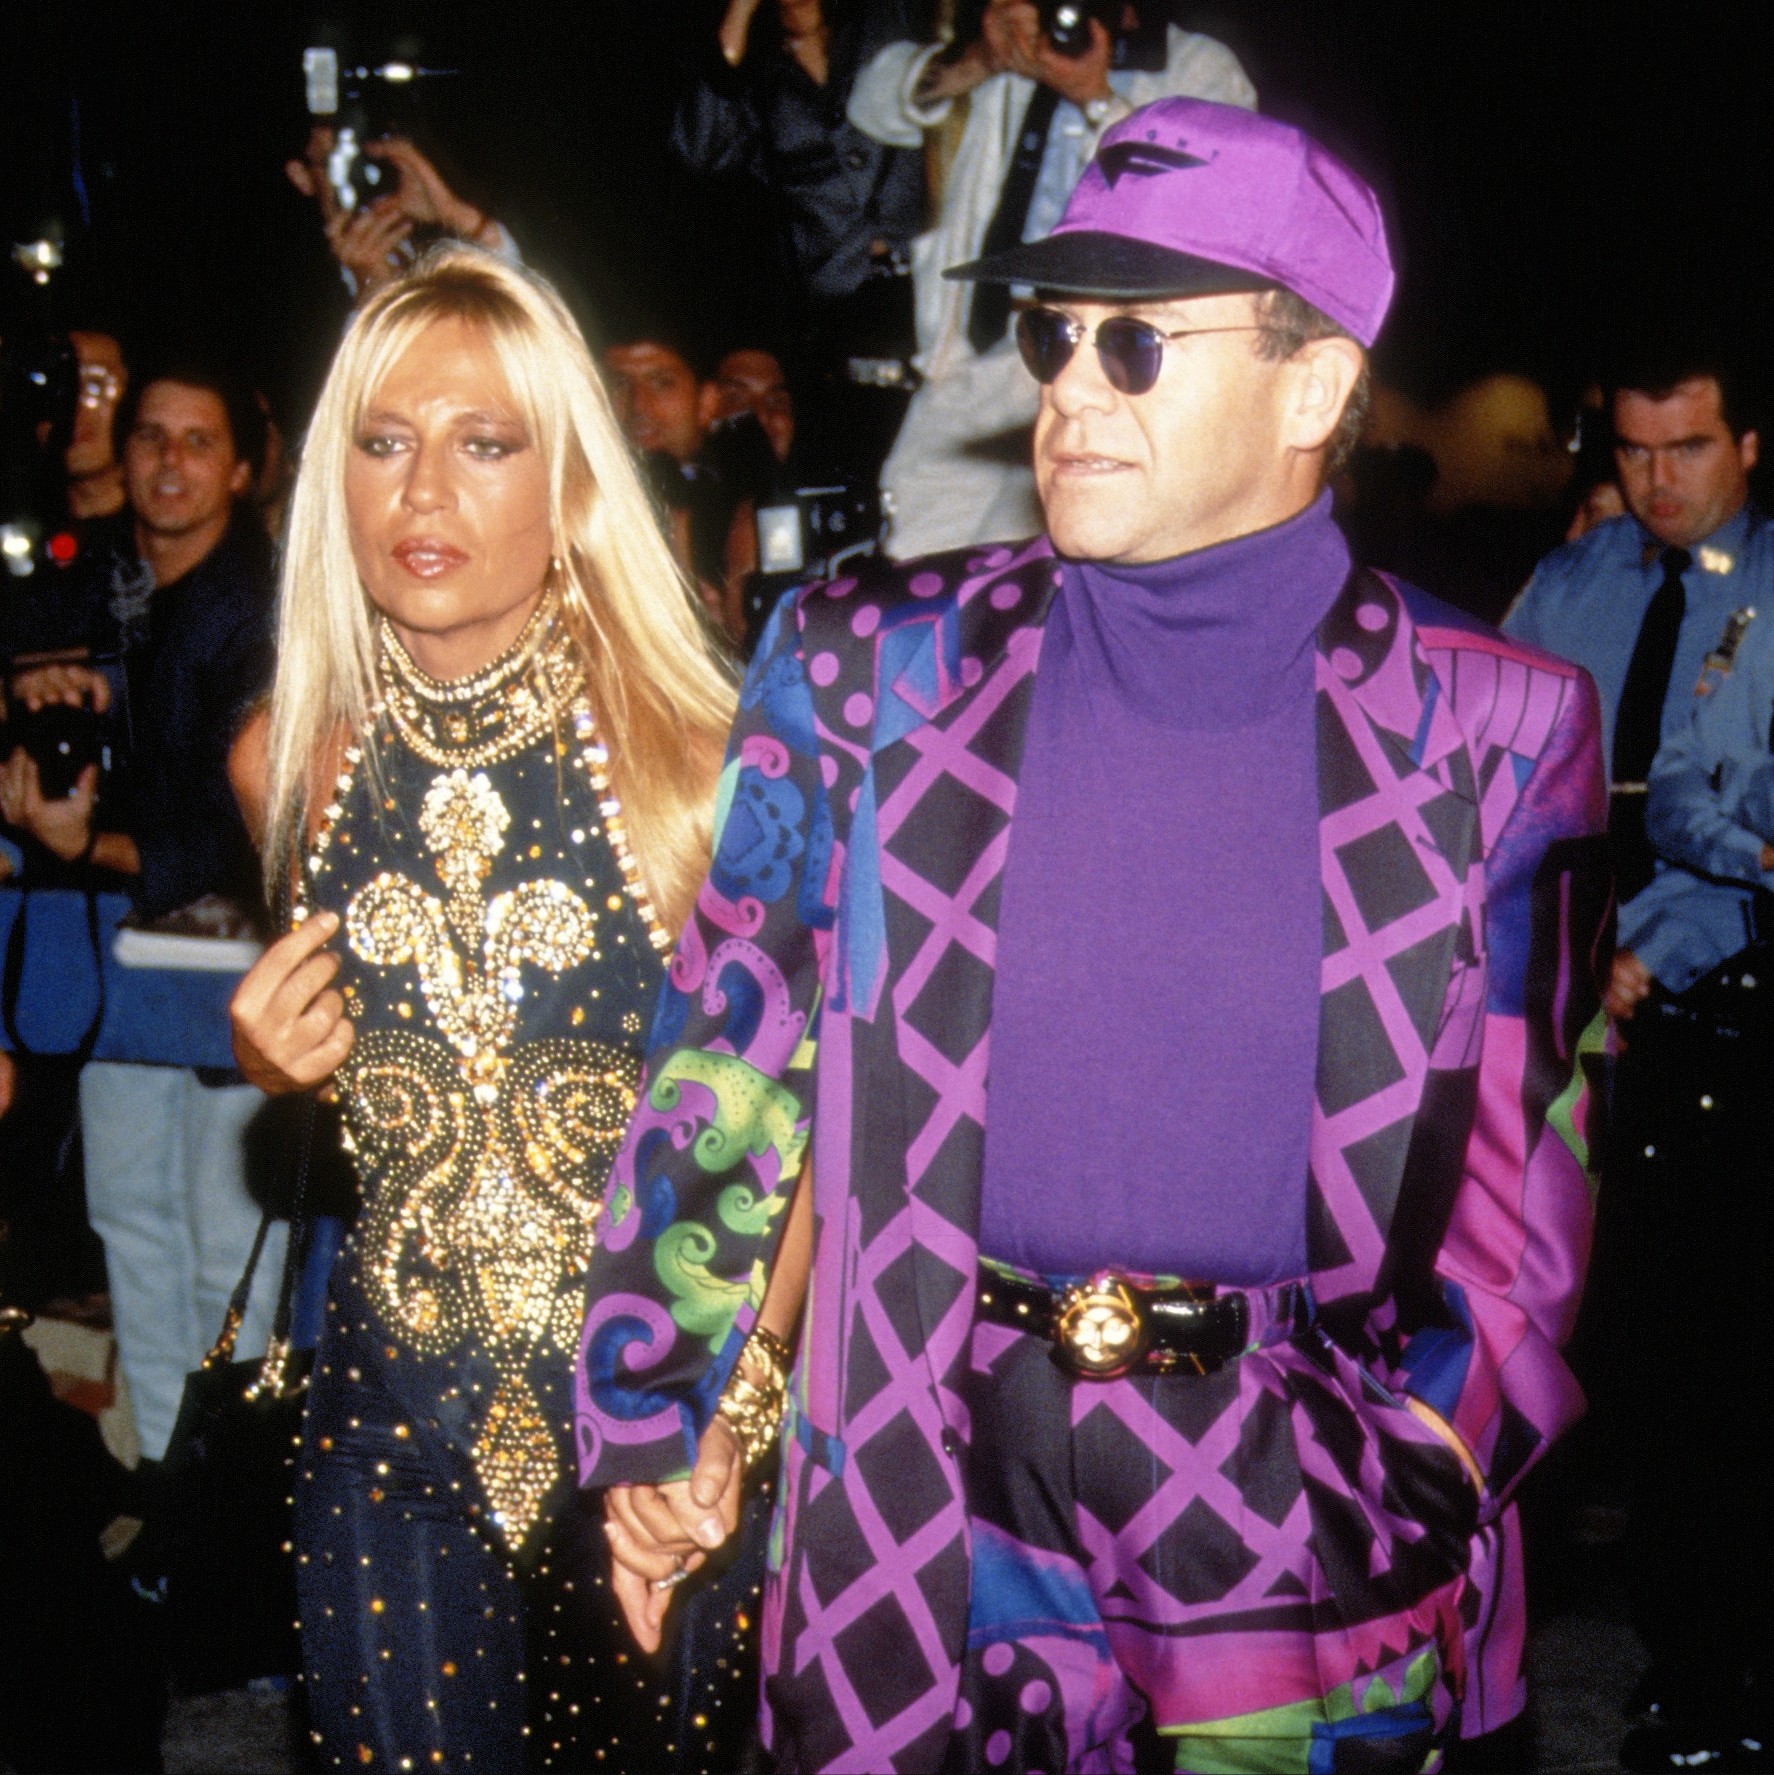 verbanning som vliegtuigen 7 of Donatella Versace's most iconic outfits